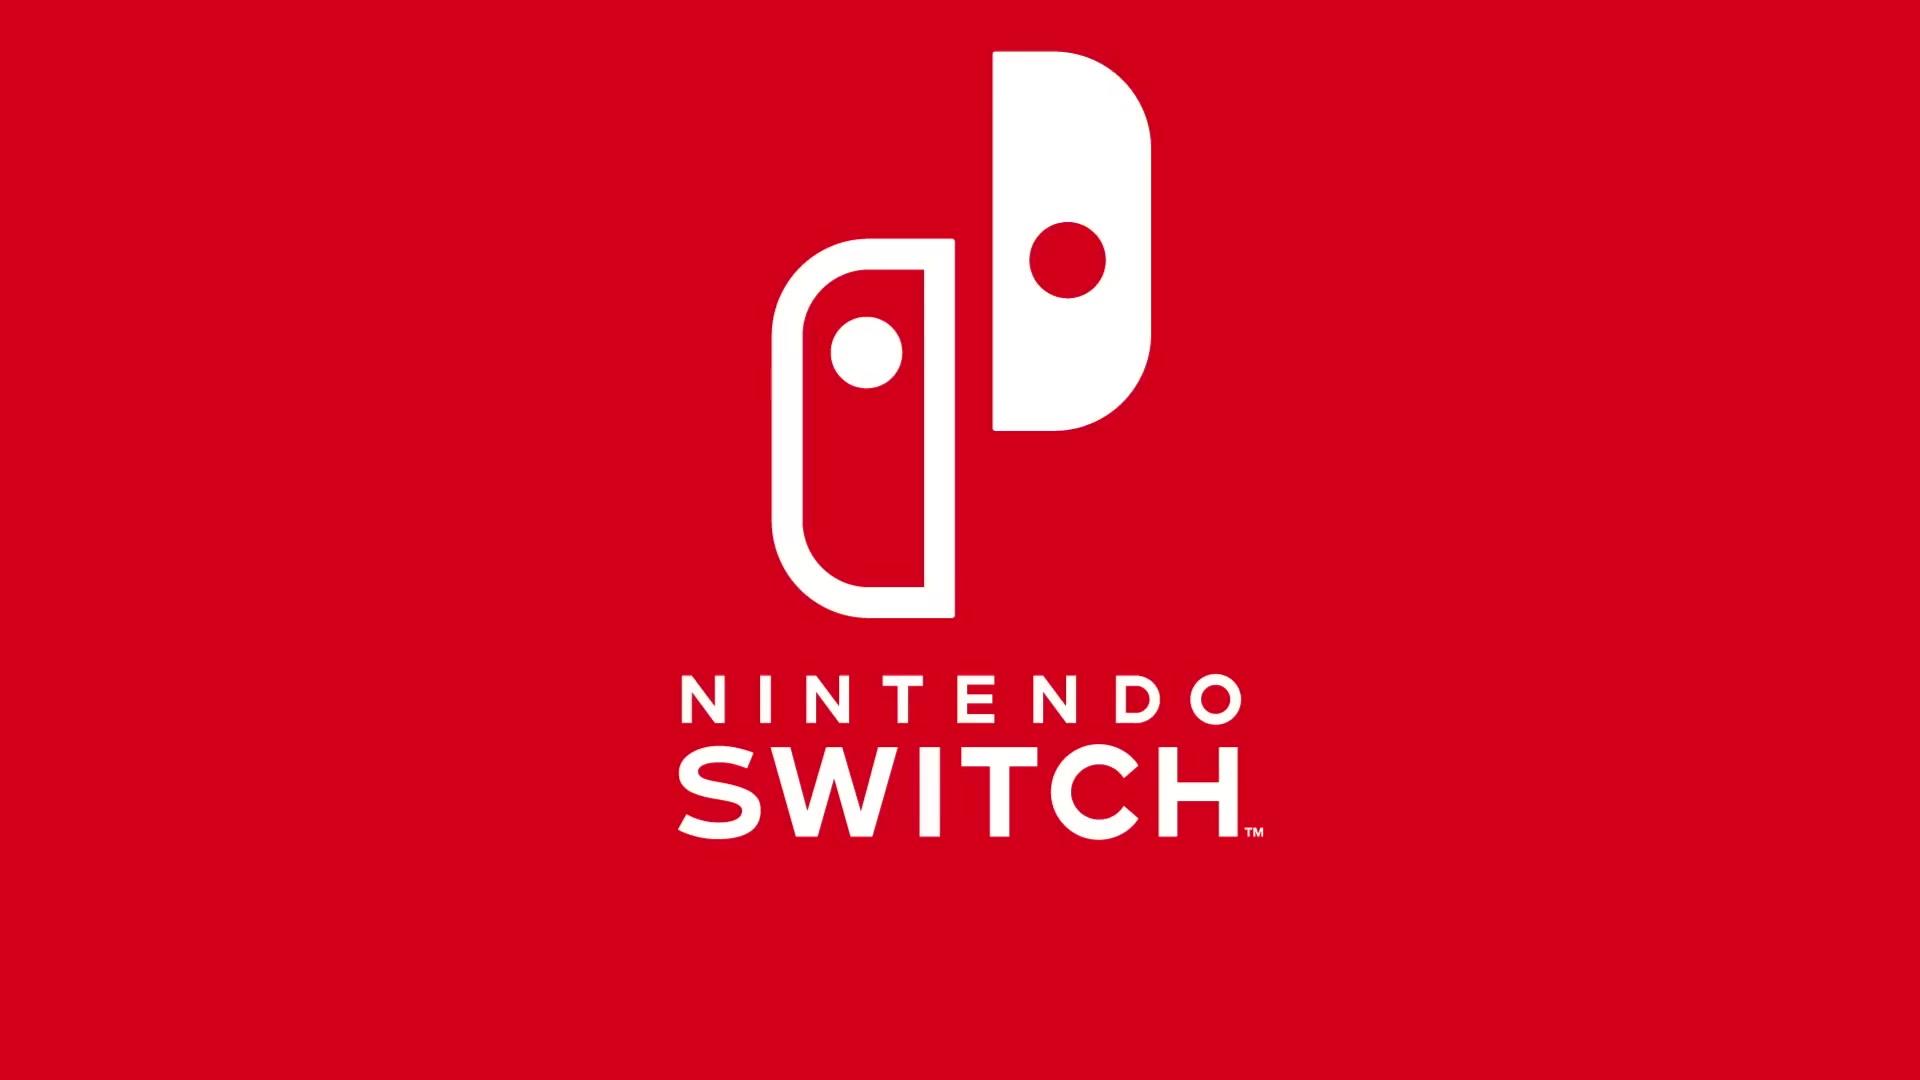 Nintendo's farewell masterpiece song for the Switch